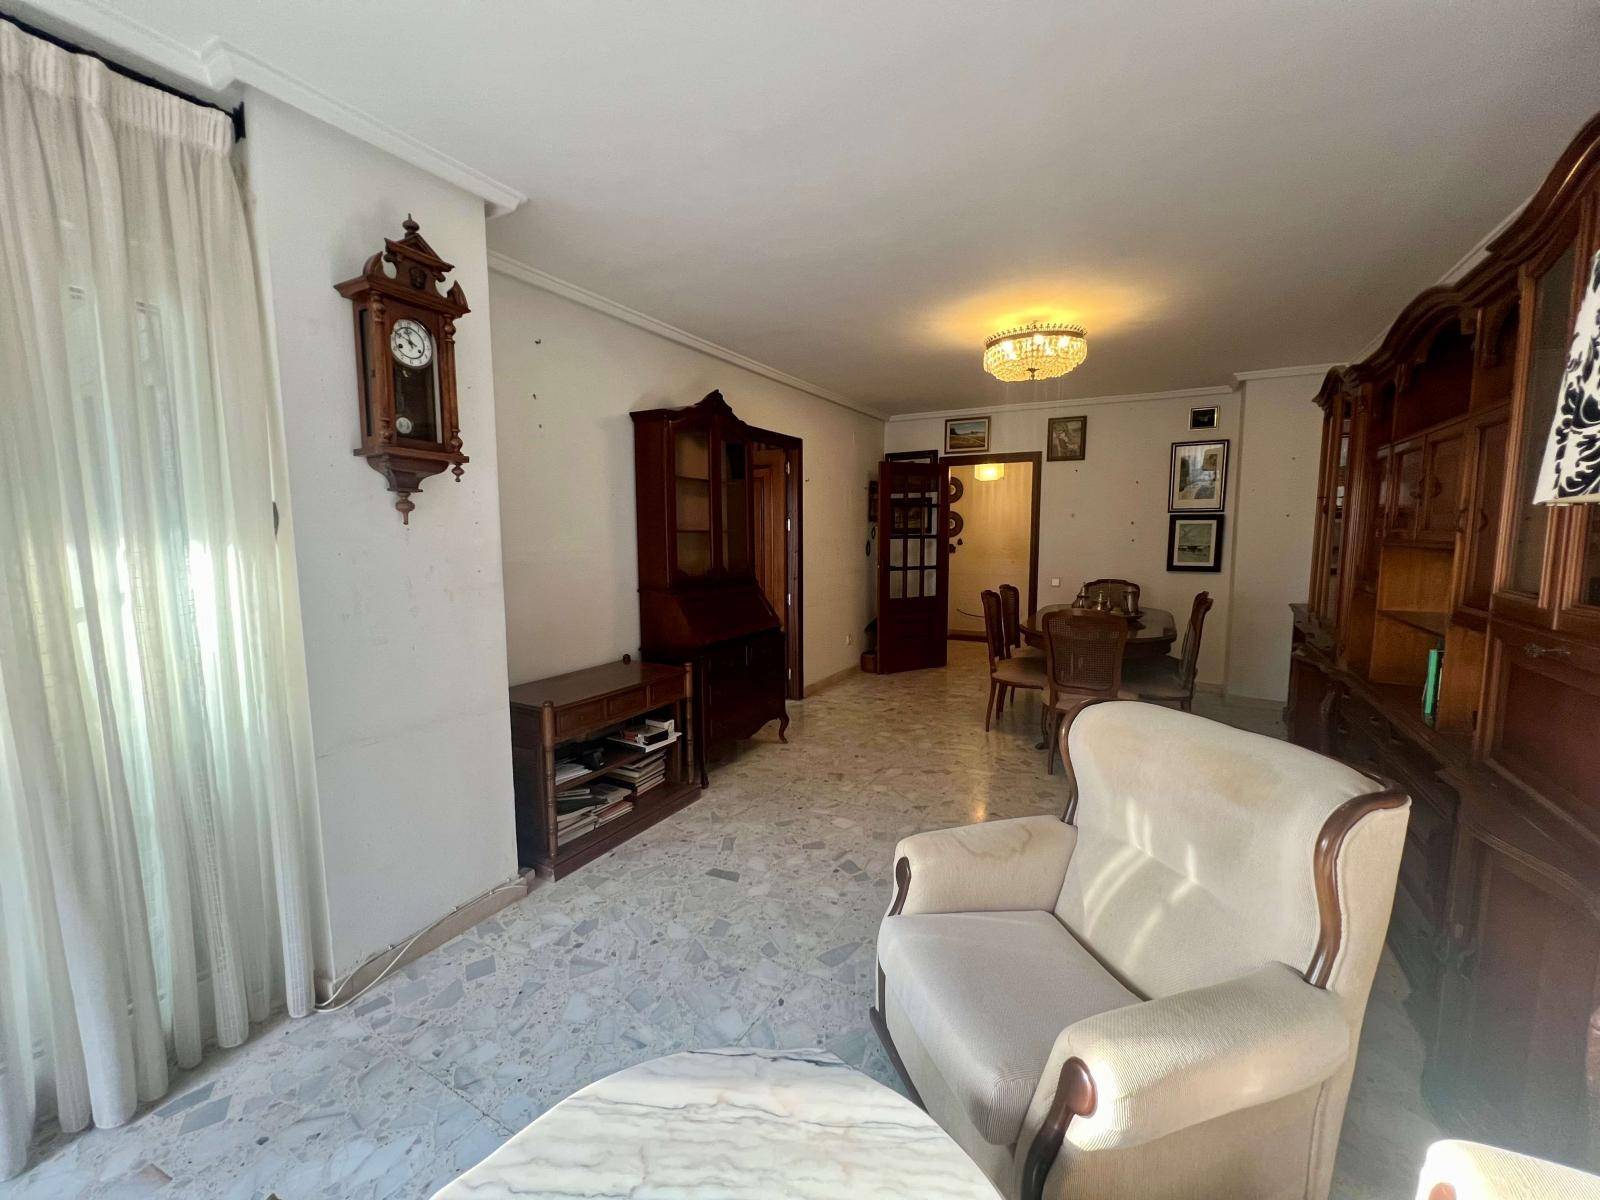 LARGE APARTMENT 100 METERS FROM THE MARINA AND IN THE HEART OF THE CITY CENTER